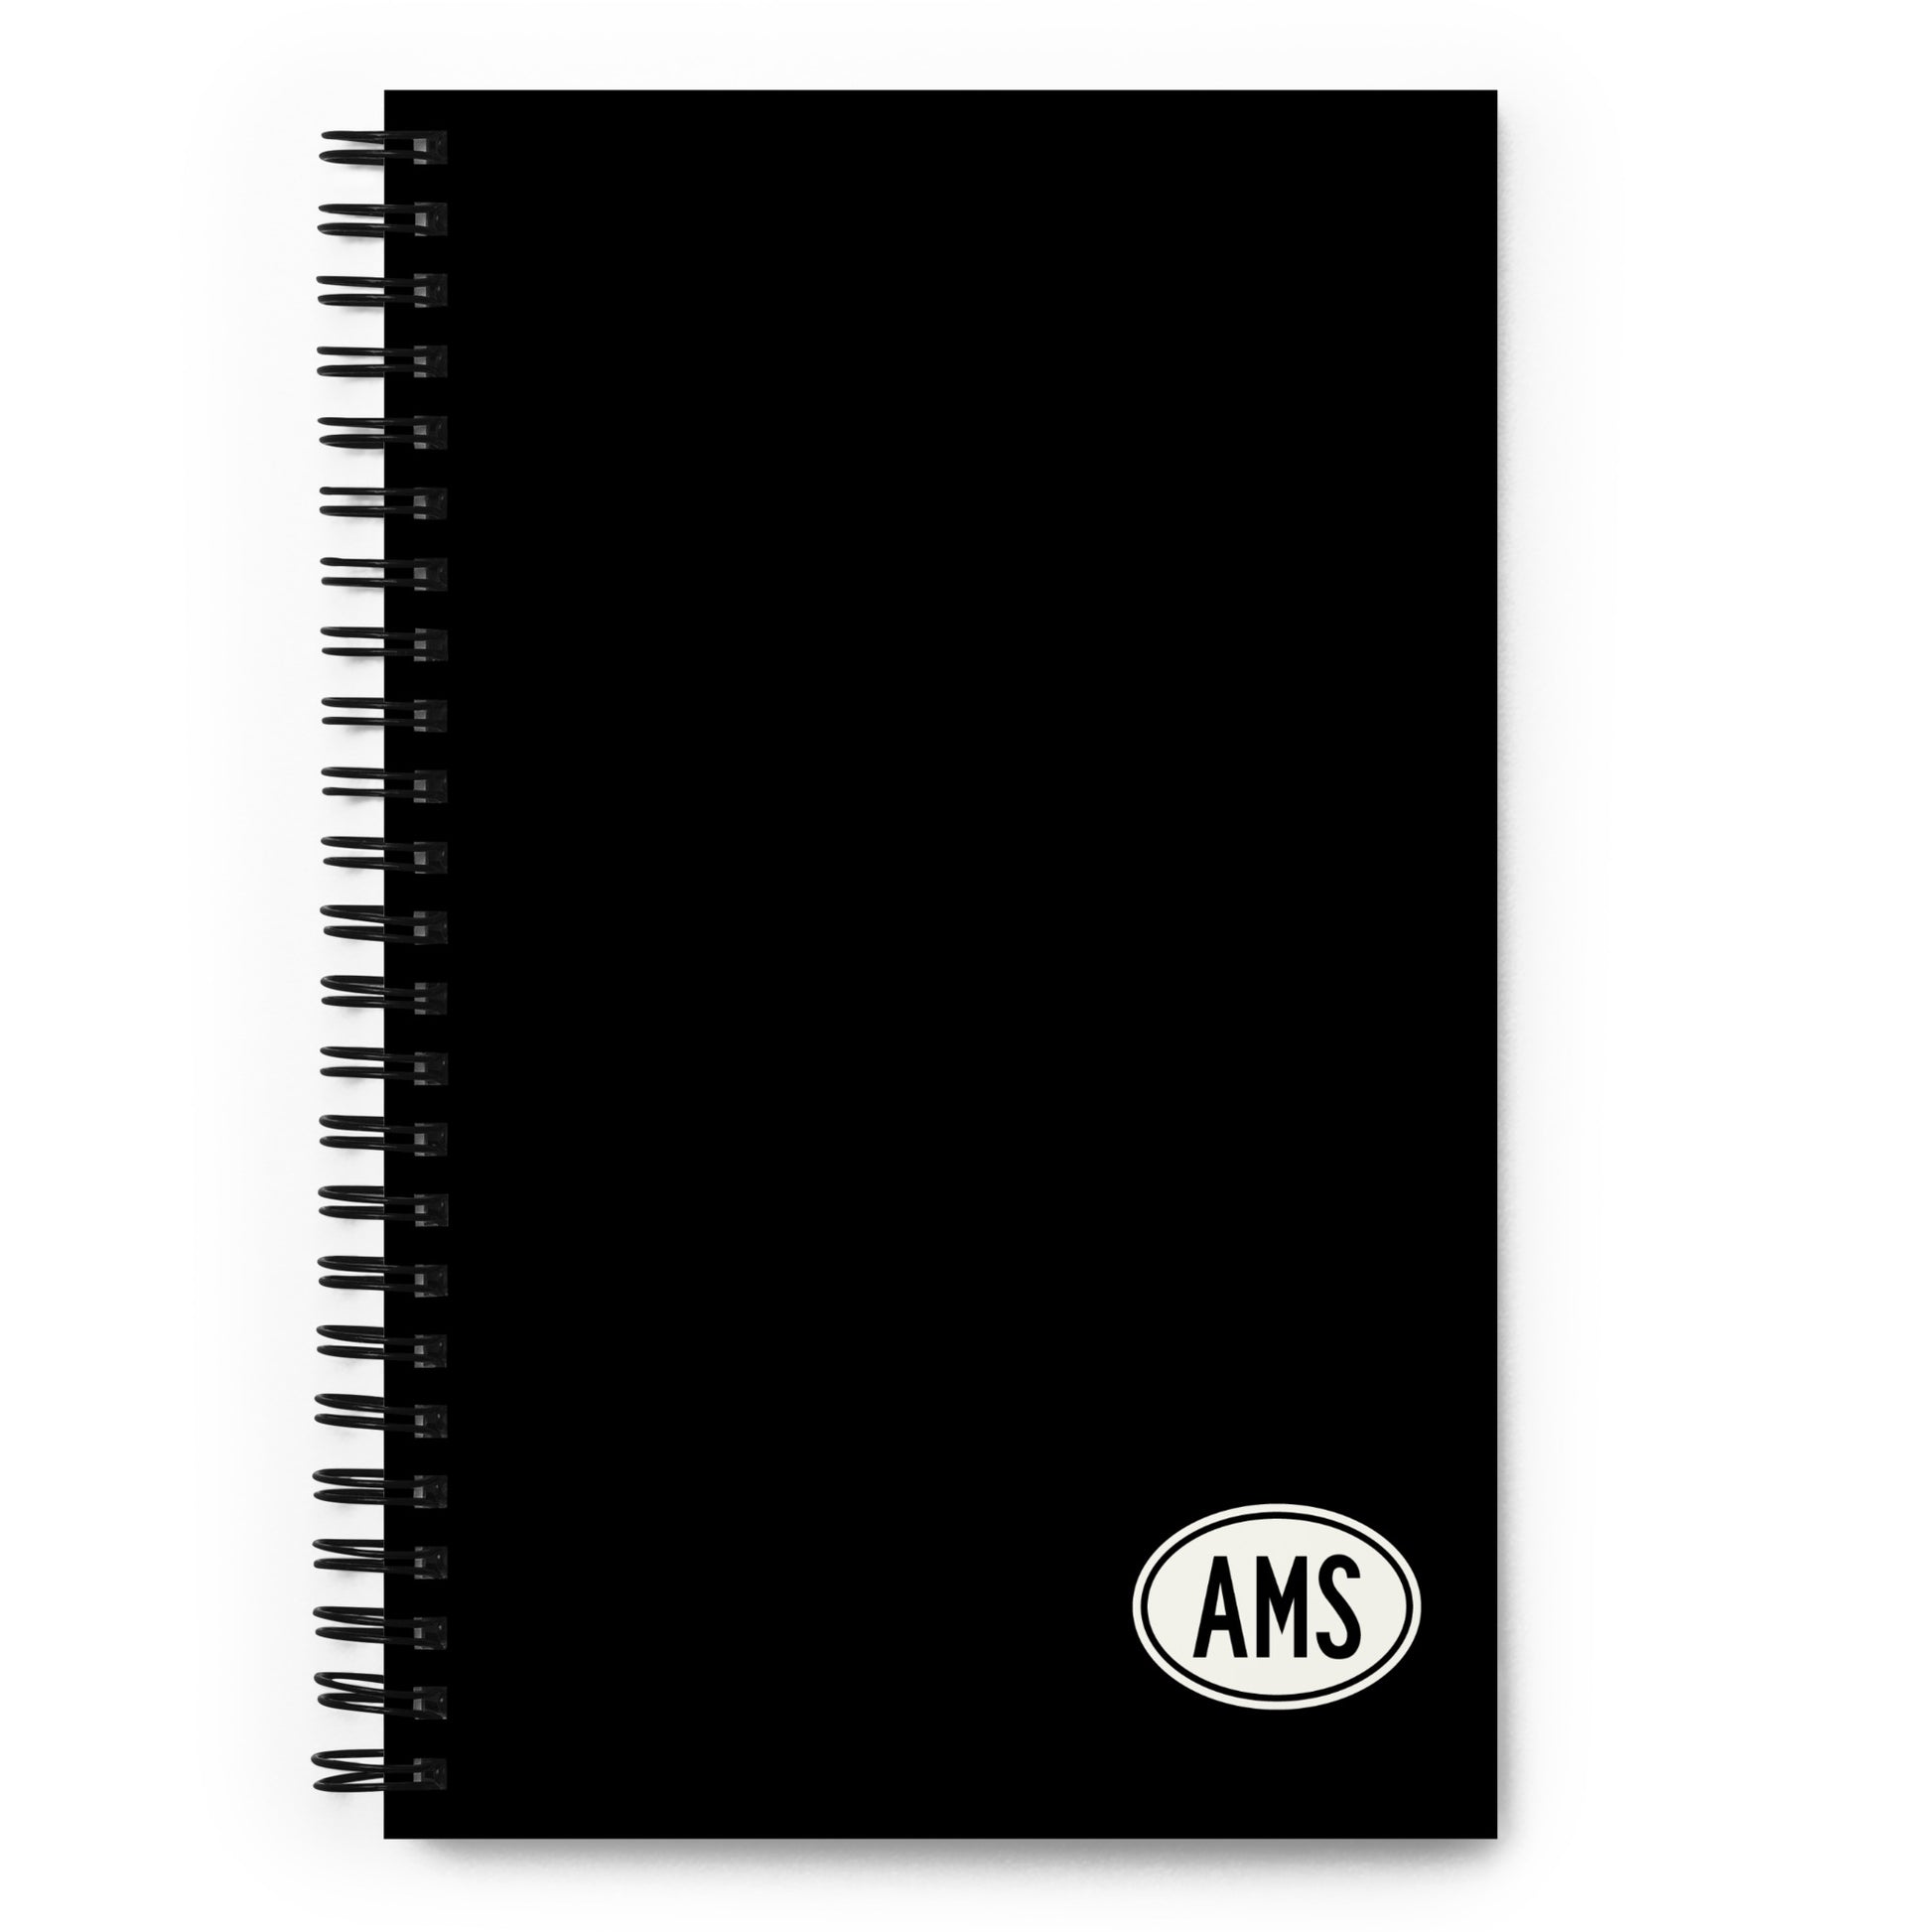 Unique Travel Gift Spiral Notebook - White Oval • AMS Amsterdam • YHM Designs - Image 01